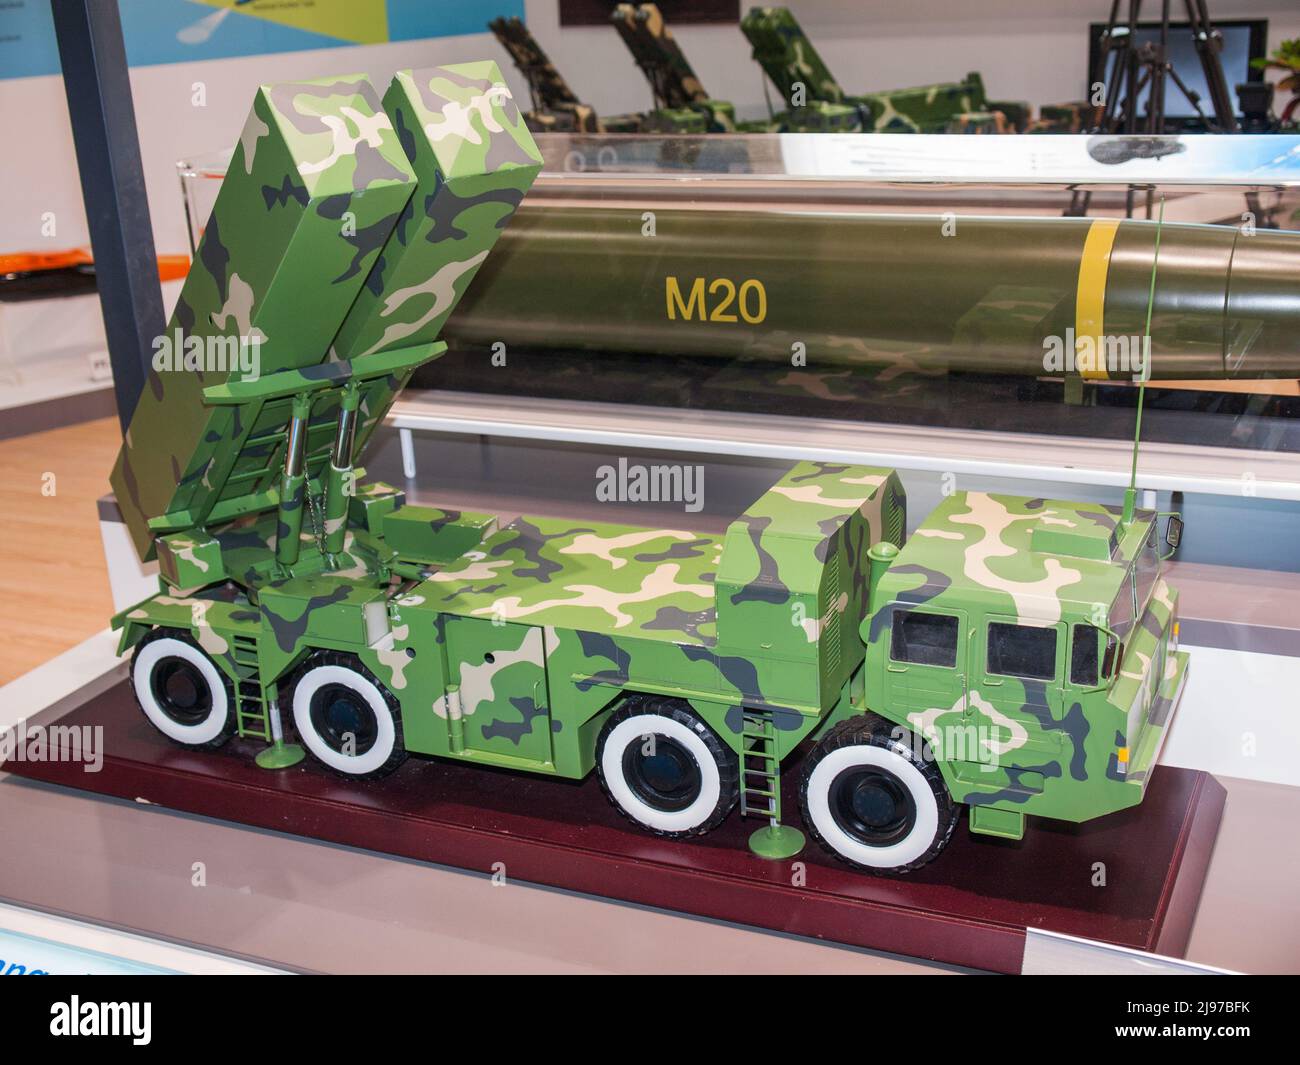 Abu Dhabi, UAE - Feb.23. 2011: Chinese DF-12 (M20CSS-X-15) tactical missile at IDEX 2011 Stock Photo